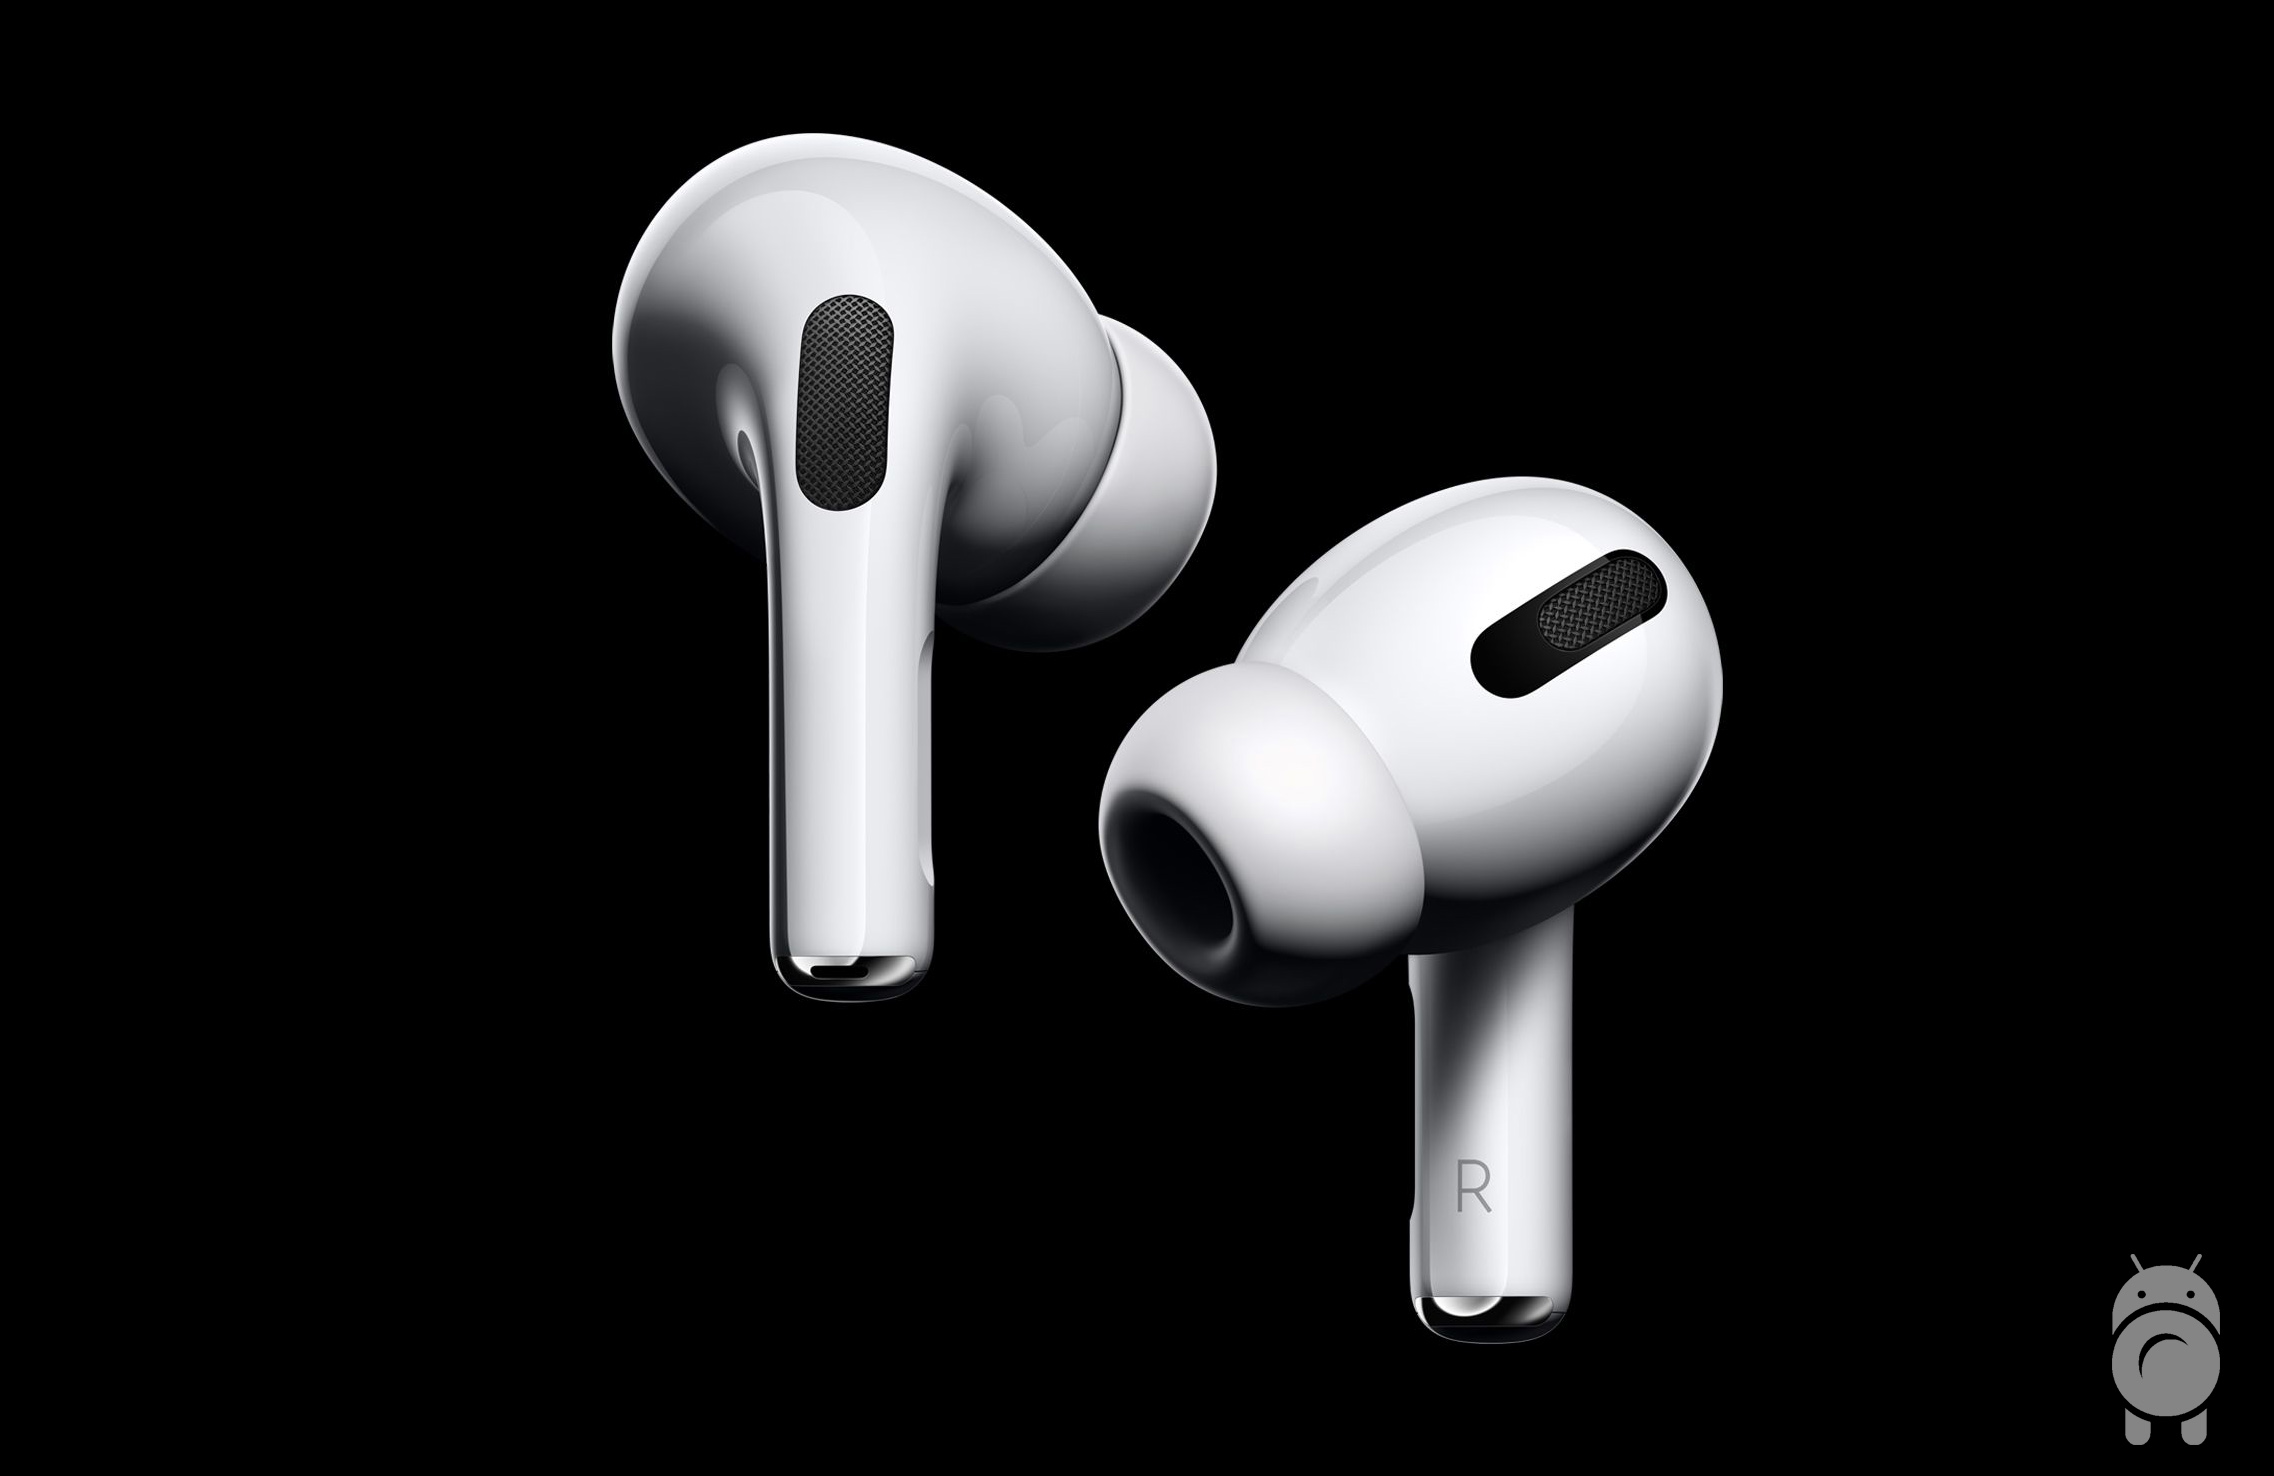 Are Airpods Compatible With Android?